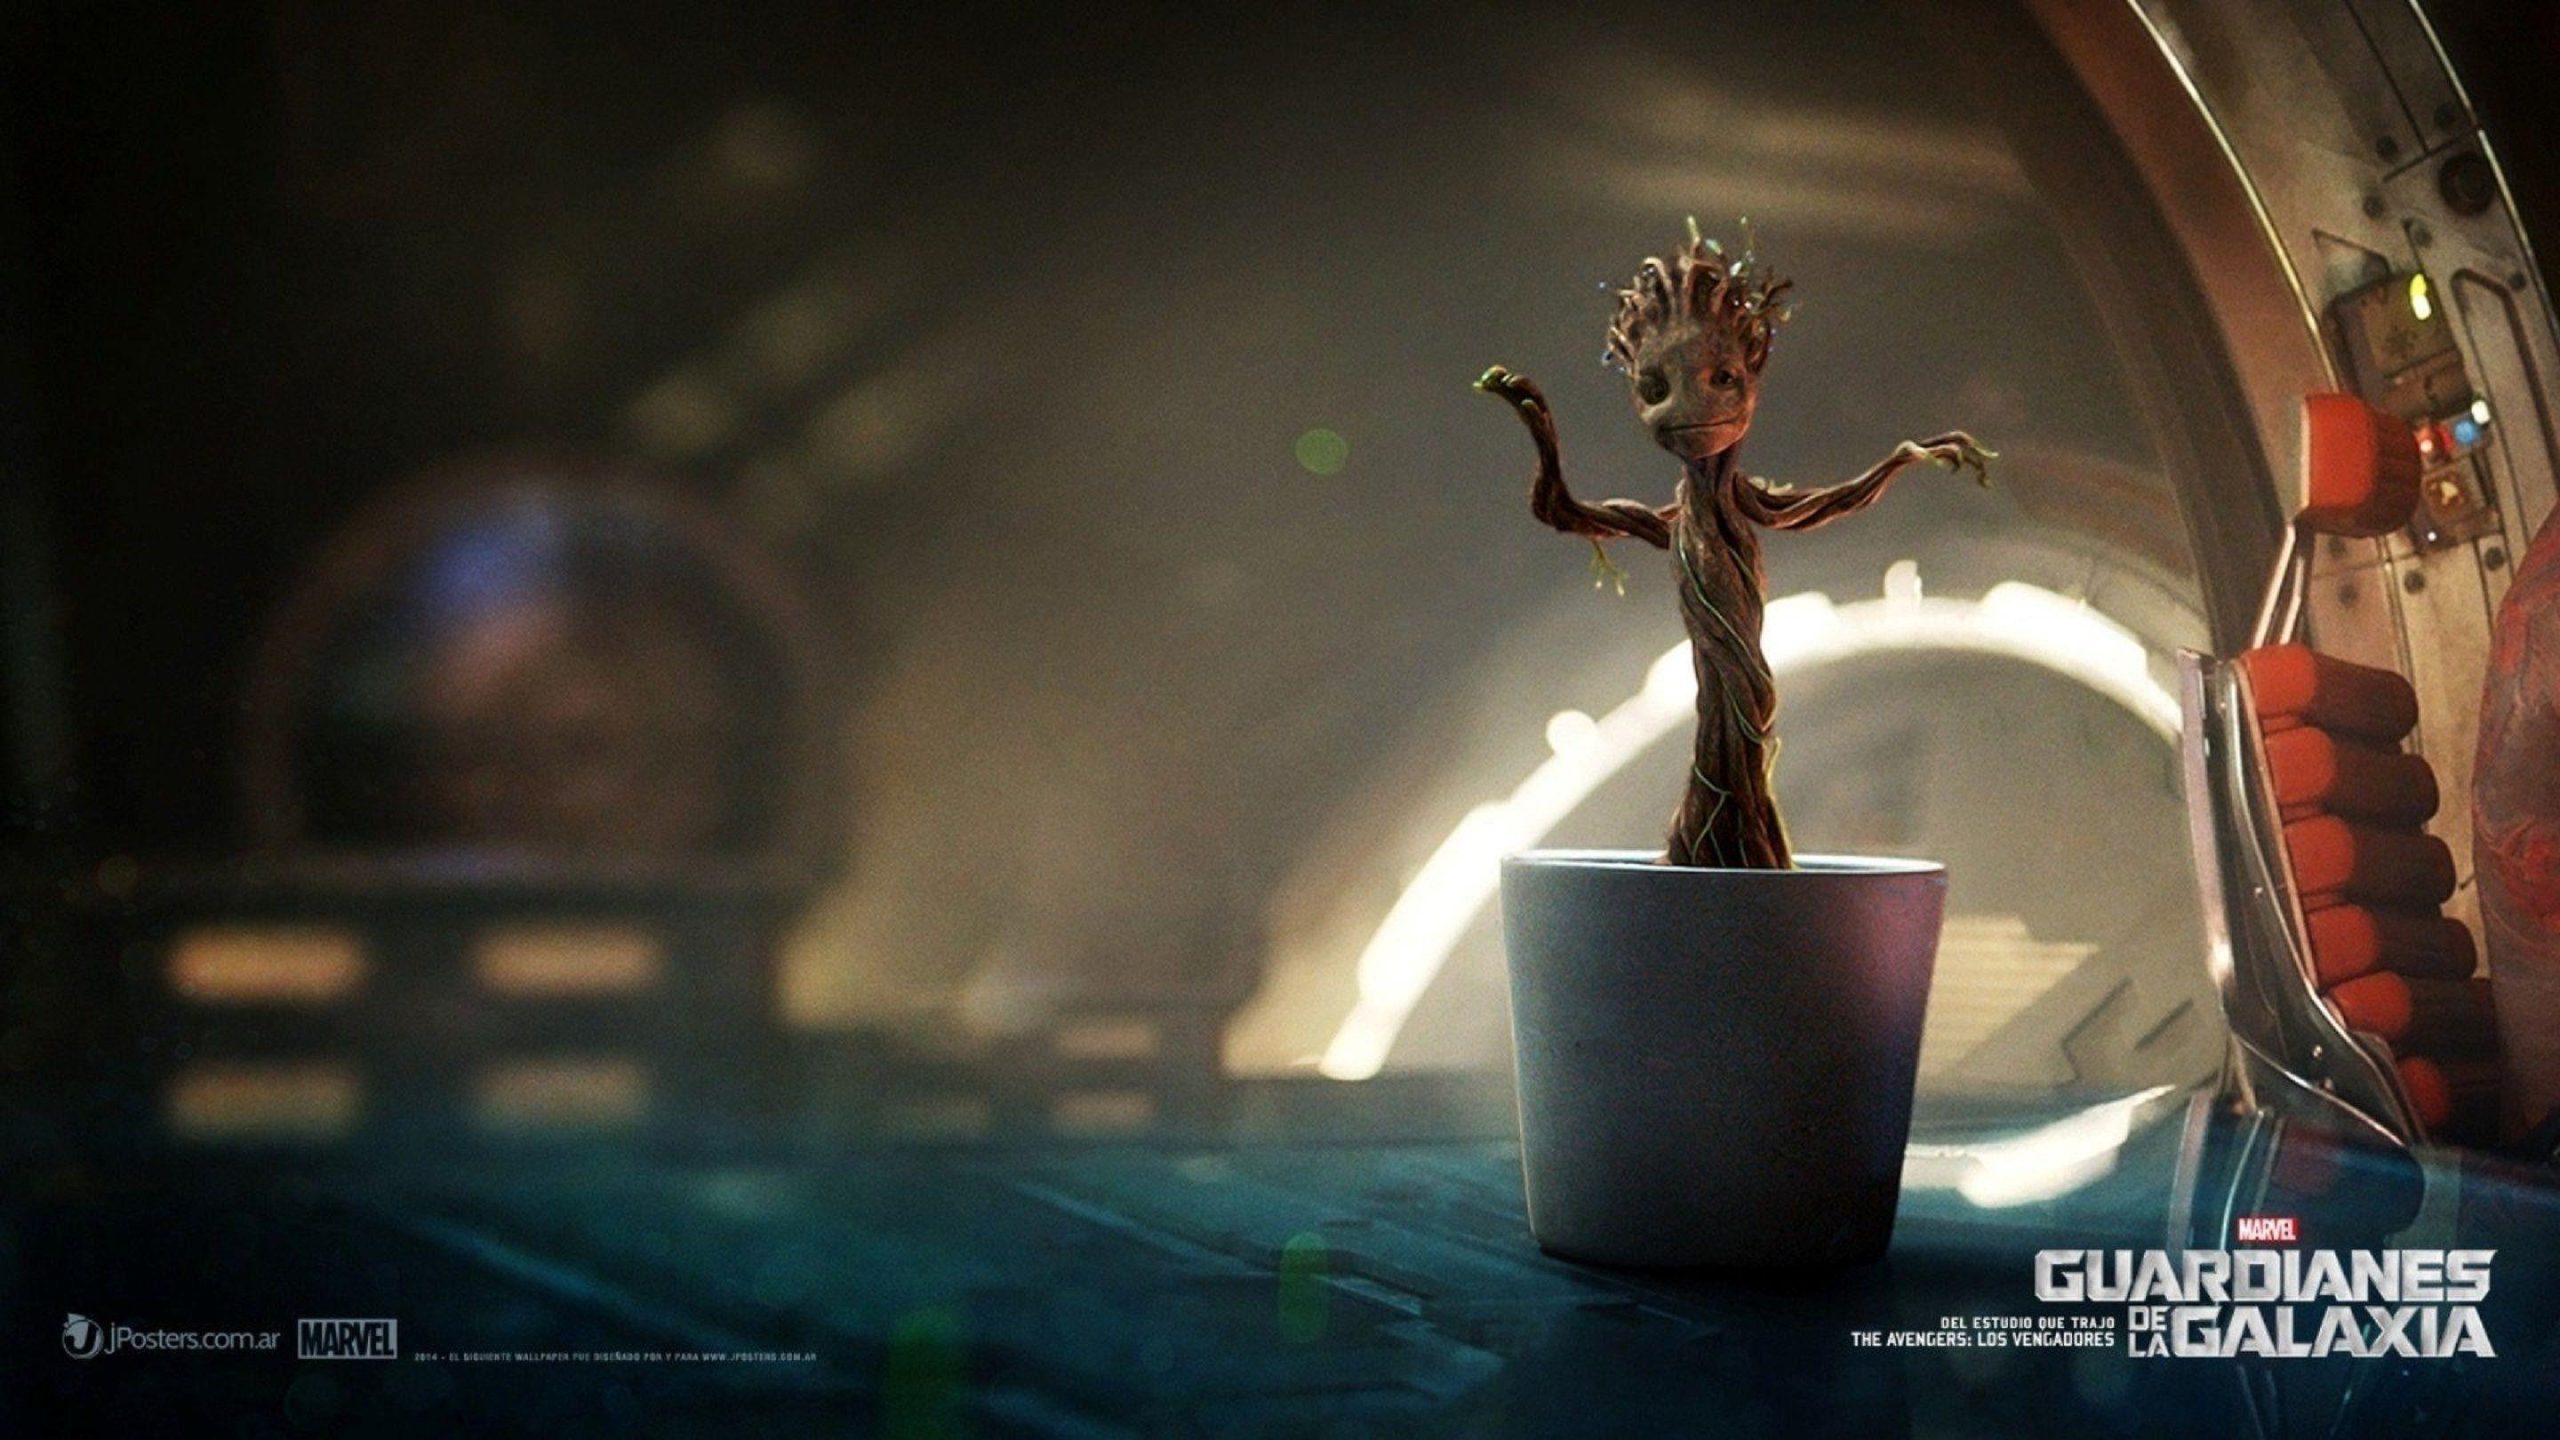 Cute Baby Groot Guardians Of The Galaxy Hd Best Wallpapers, Cute Baby Groot Guardians Of The Galaxy, Movies